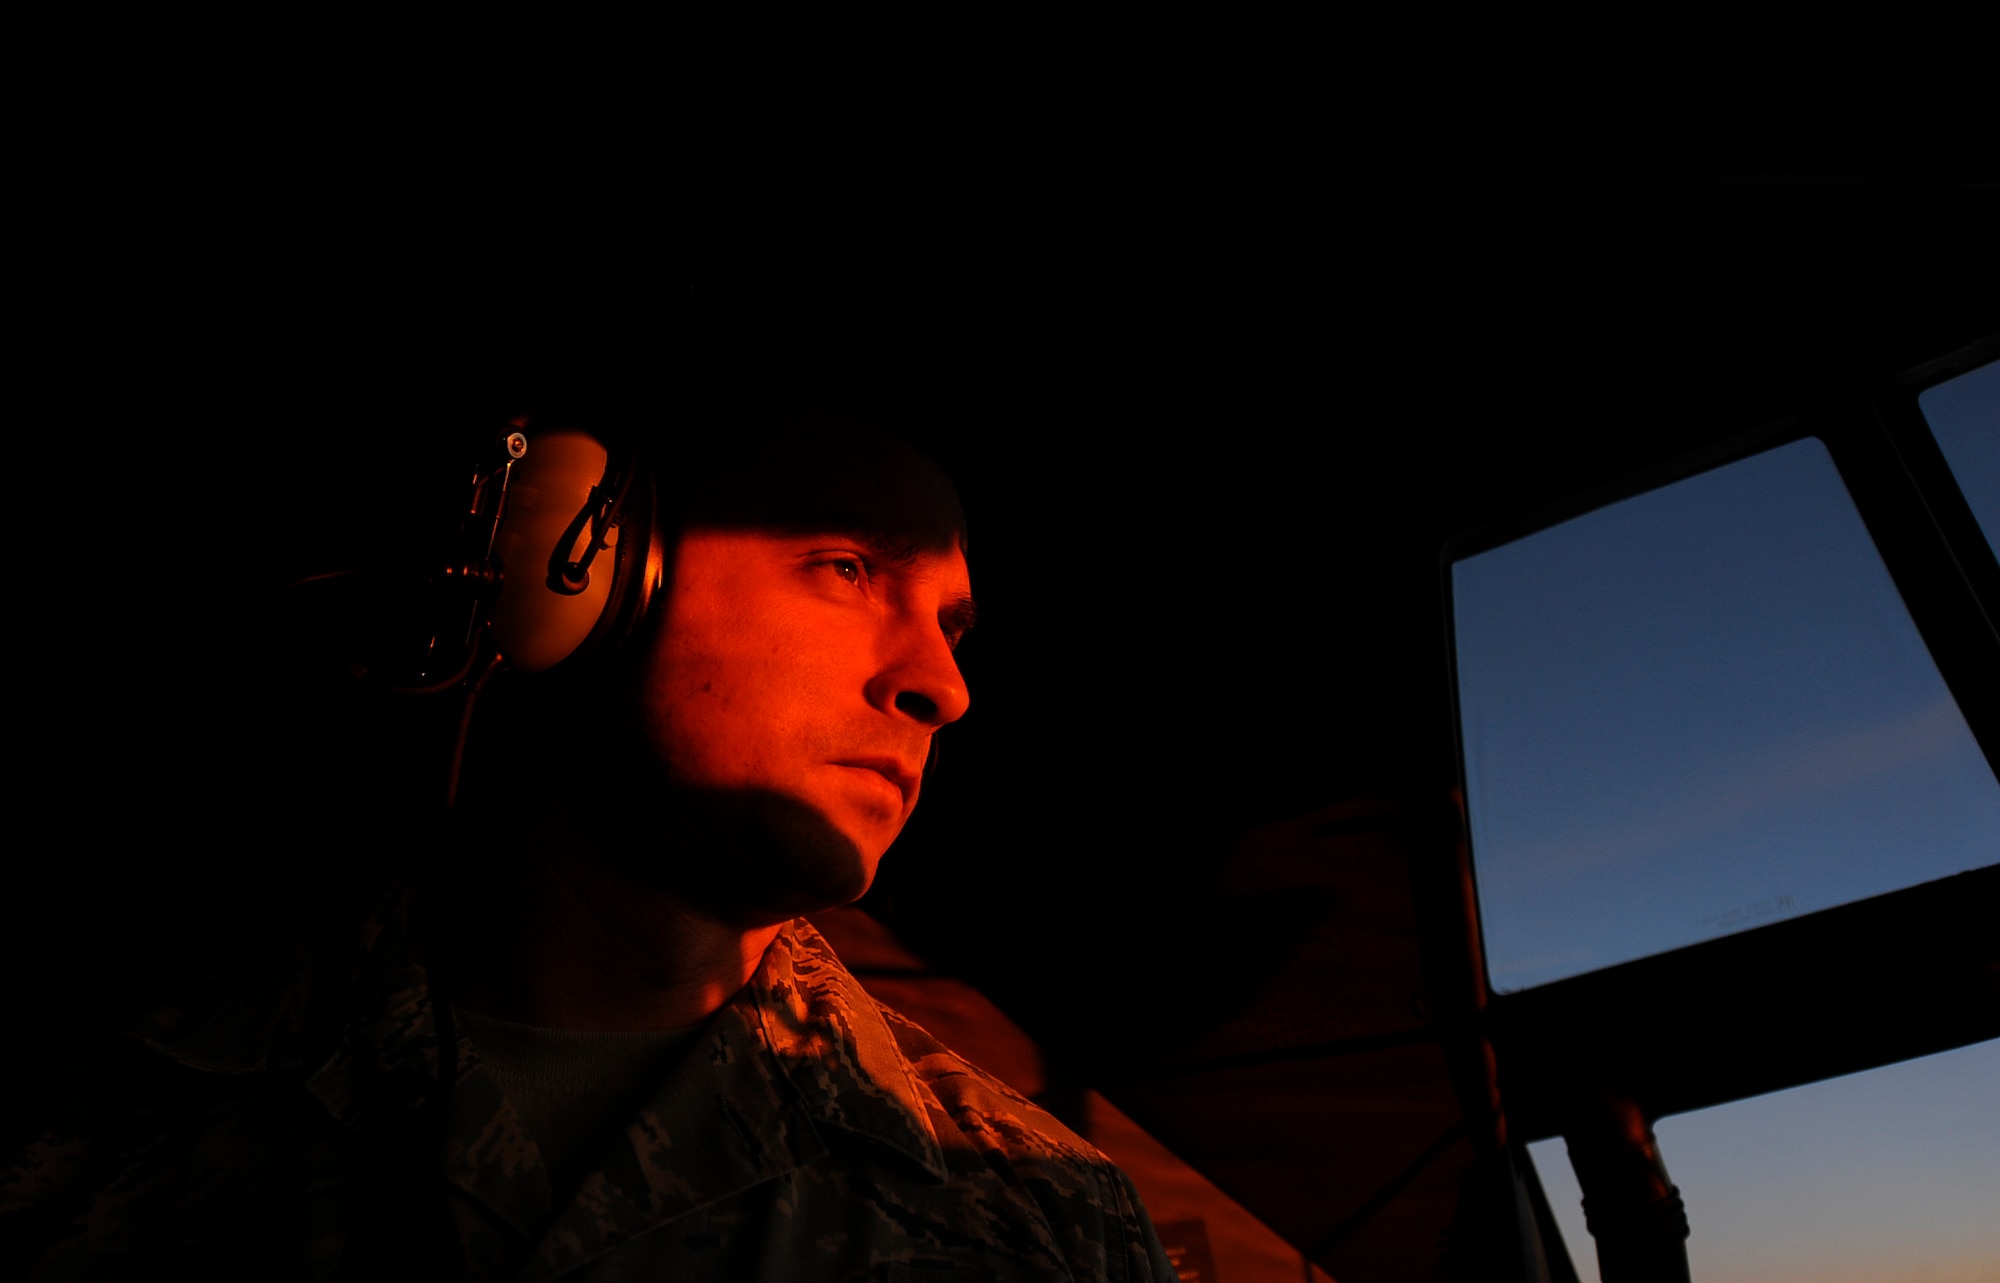 U.S. Air Force Master Sgt. Caleb Thorne, 86th Aircraft Maintenance Squadron productions superintendent, watches the sunrise over Shannon, Ireland, from a C-130J Super Hercules Dec. 4, 2017. The crew traveled across three countries and three states within the U.S. in one week to pick-up Ramstein’s new aircraft from Lockheed Martin Aeronautics Company production facility headquarters in Marietta, Georgia. (U.S. Air Force photo by Airman 1st Class Savannah L. Waters)